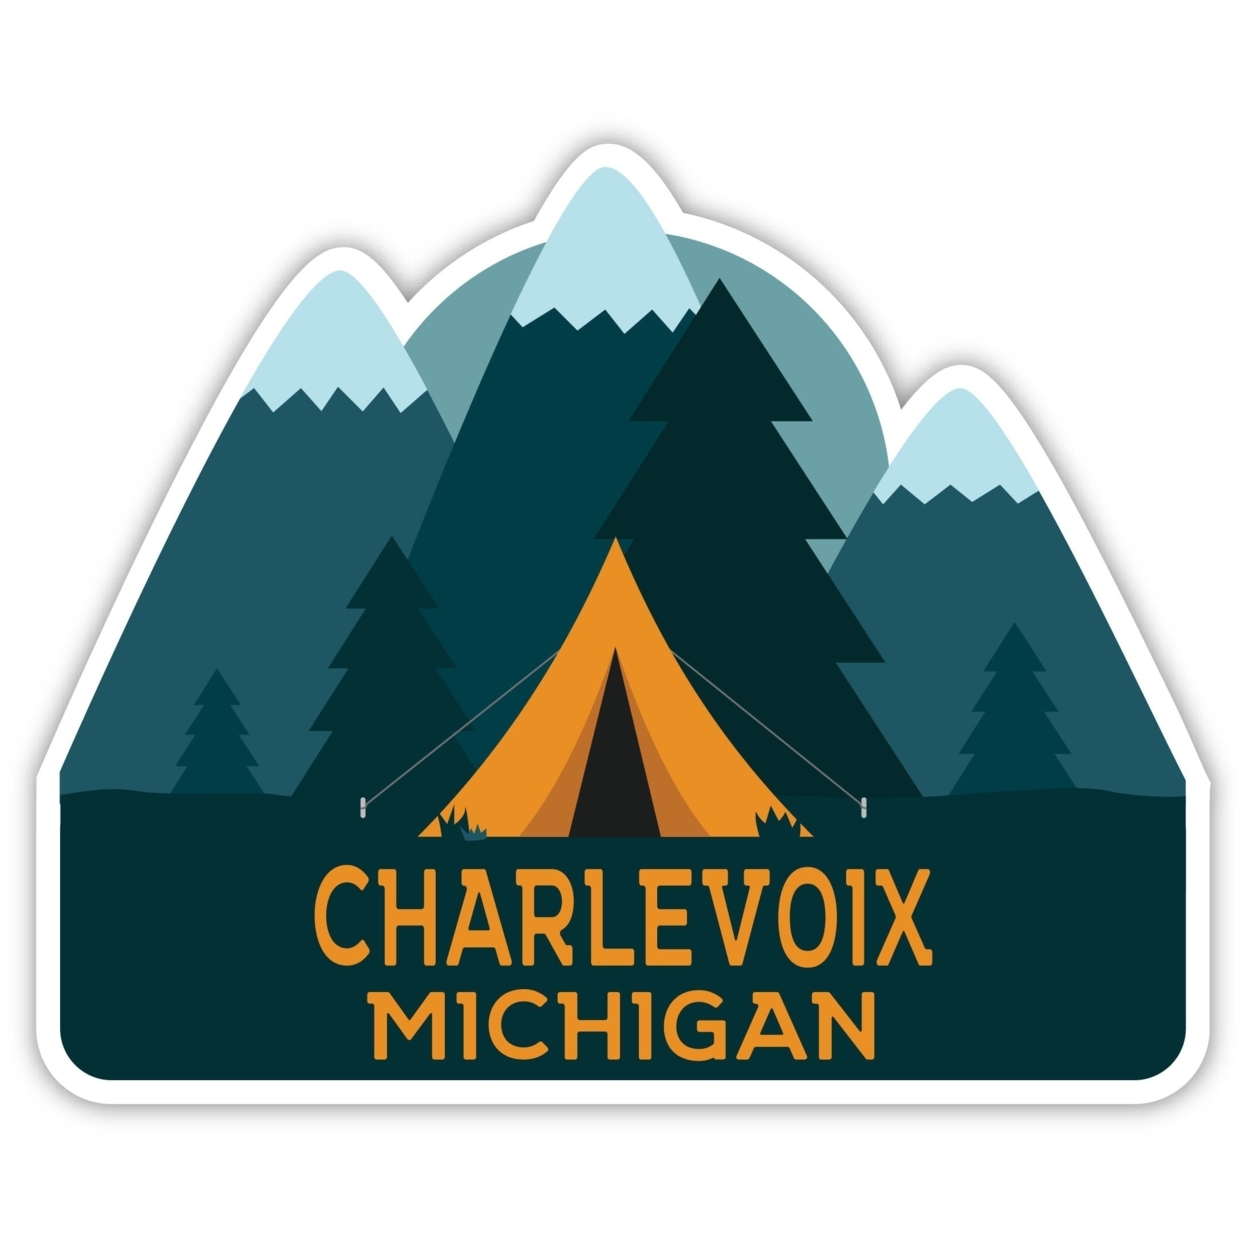 Charlevoix Michigan Souvenir Decorative Stickers (Choose Theme And Size) - 4-Pack, 10-Inch, Tent